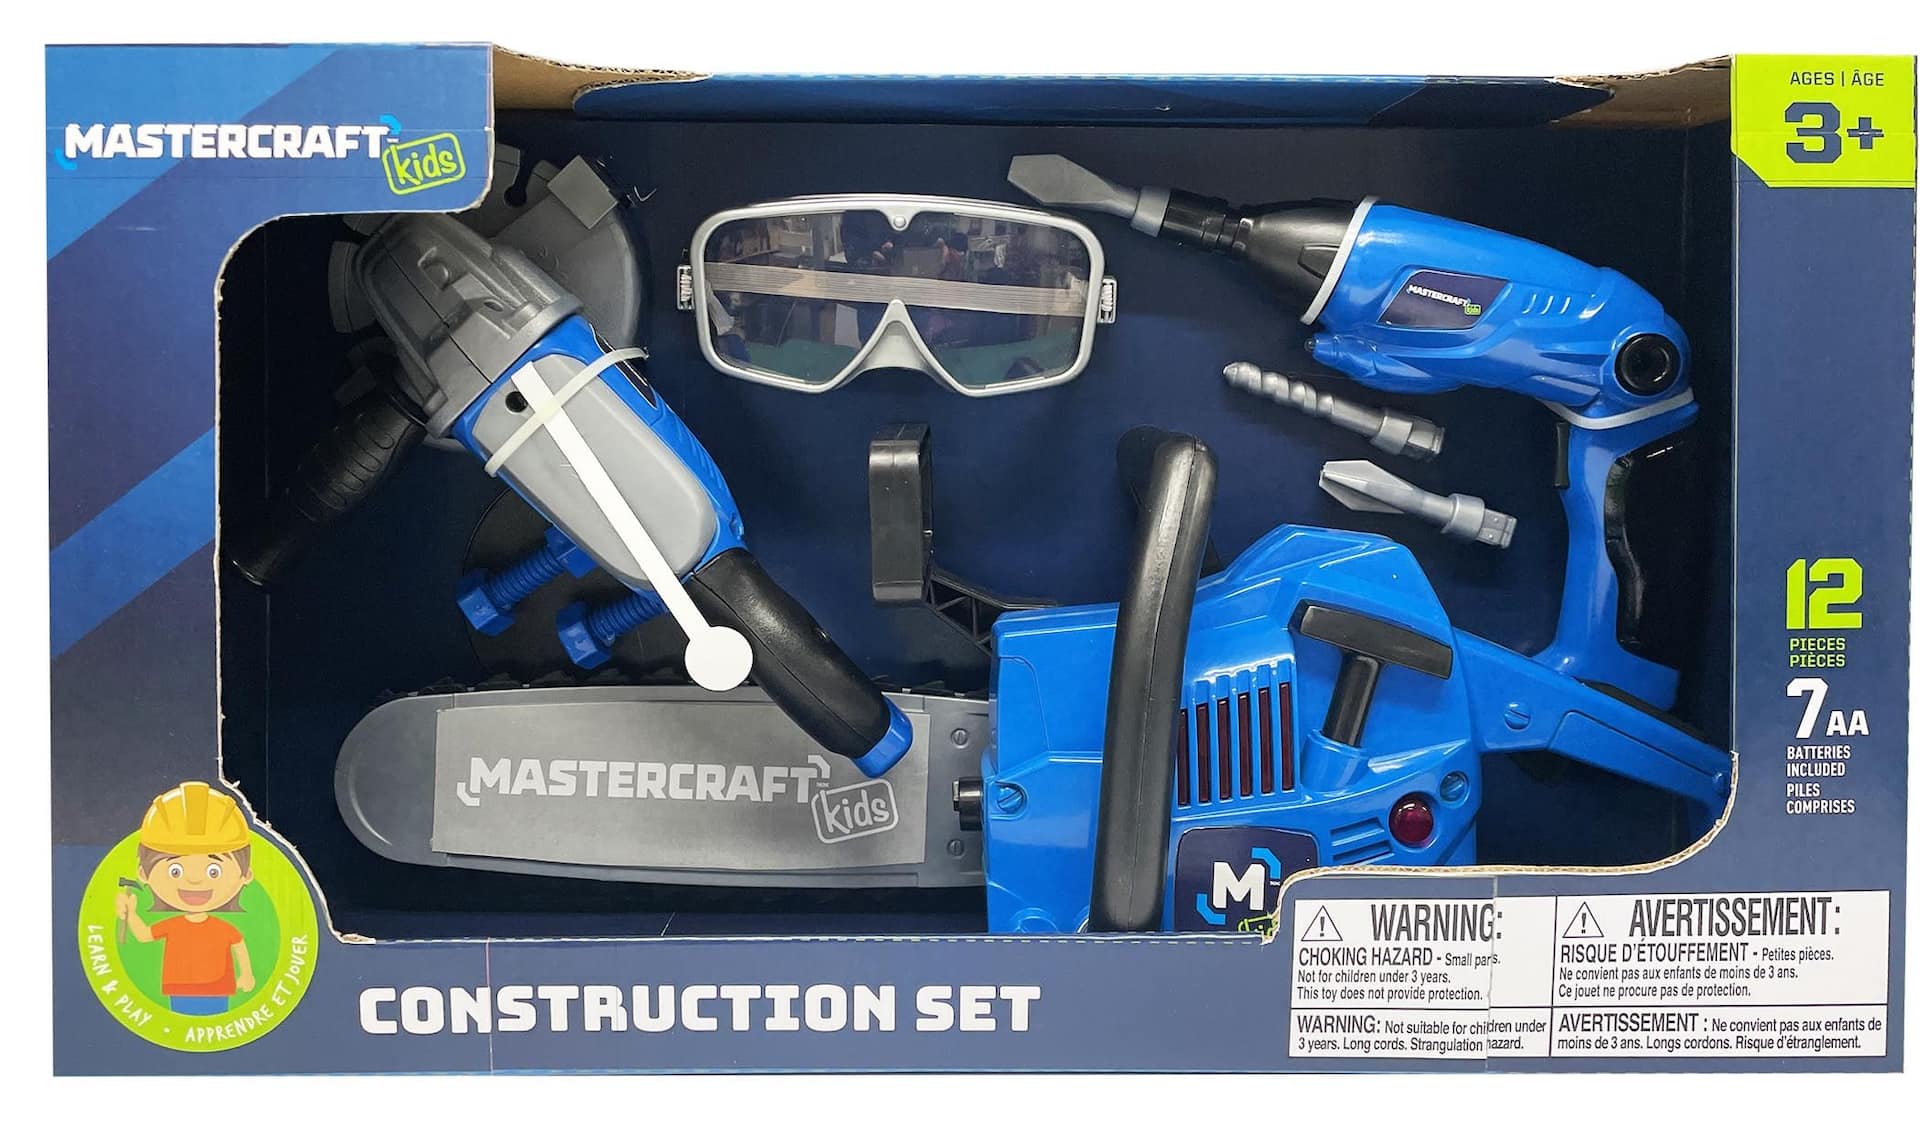 Mastercraft Kids Learn & Play Pretend Construction Toy Set, Ages 3